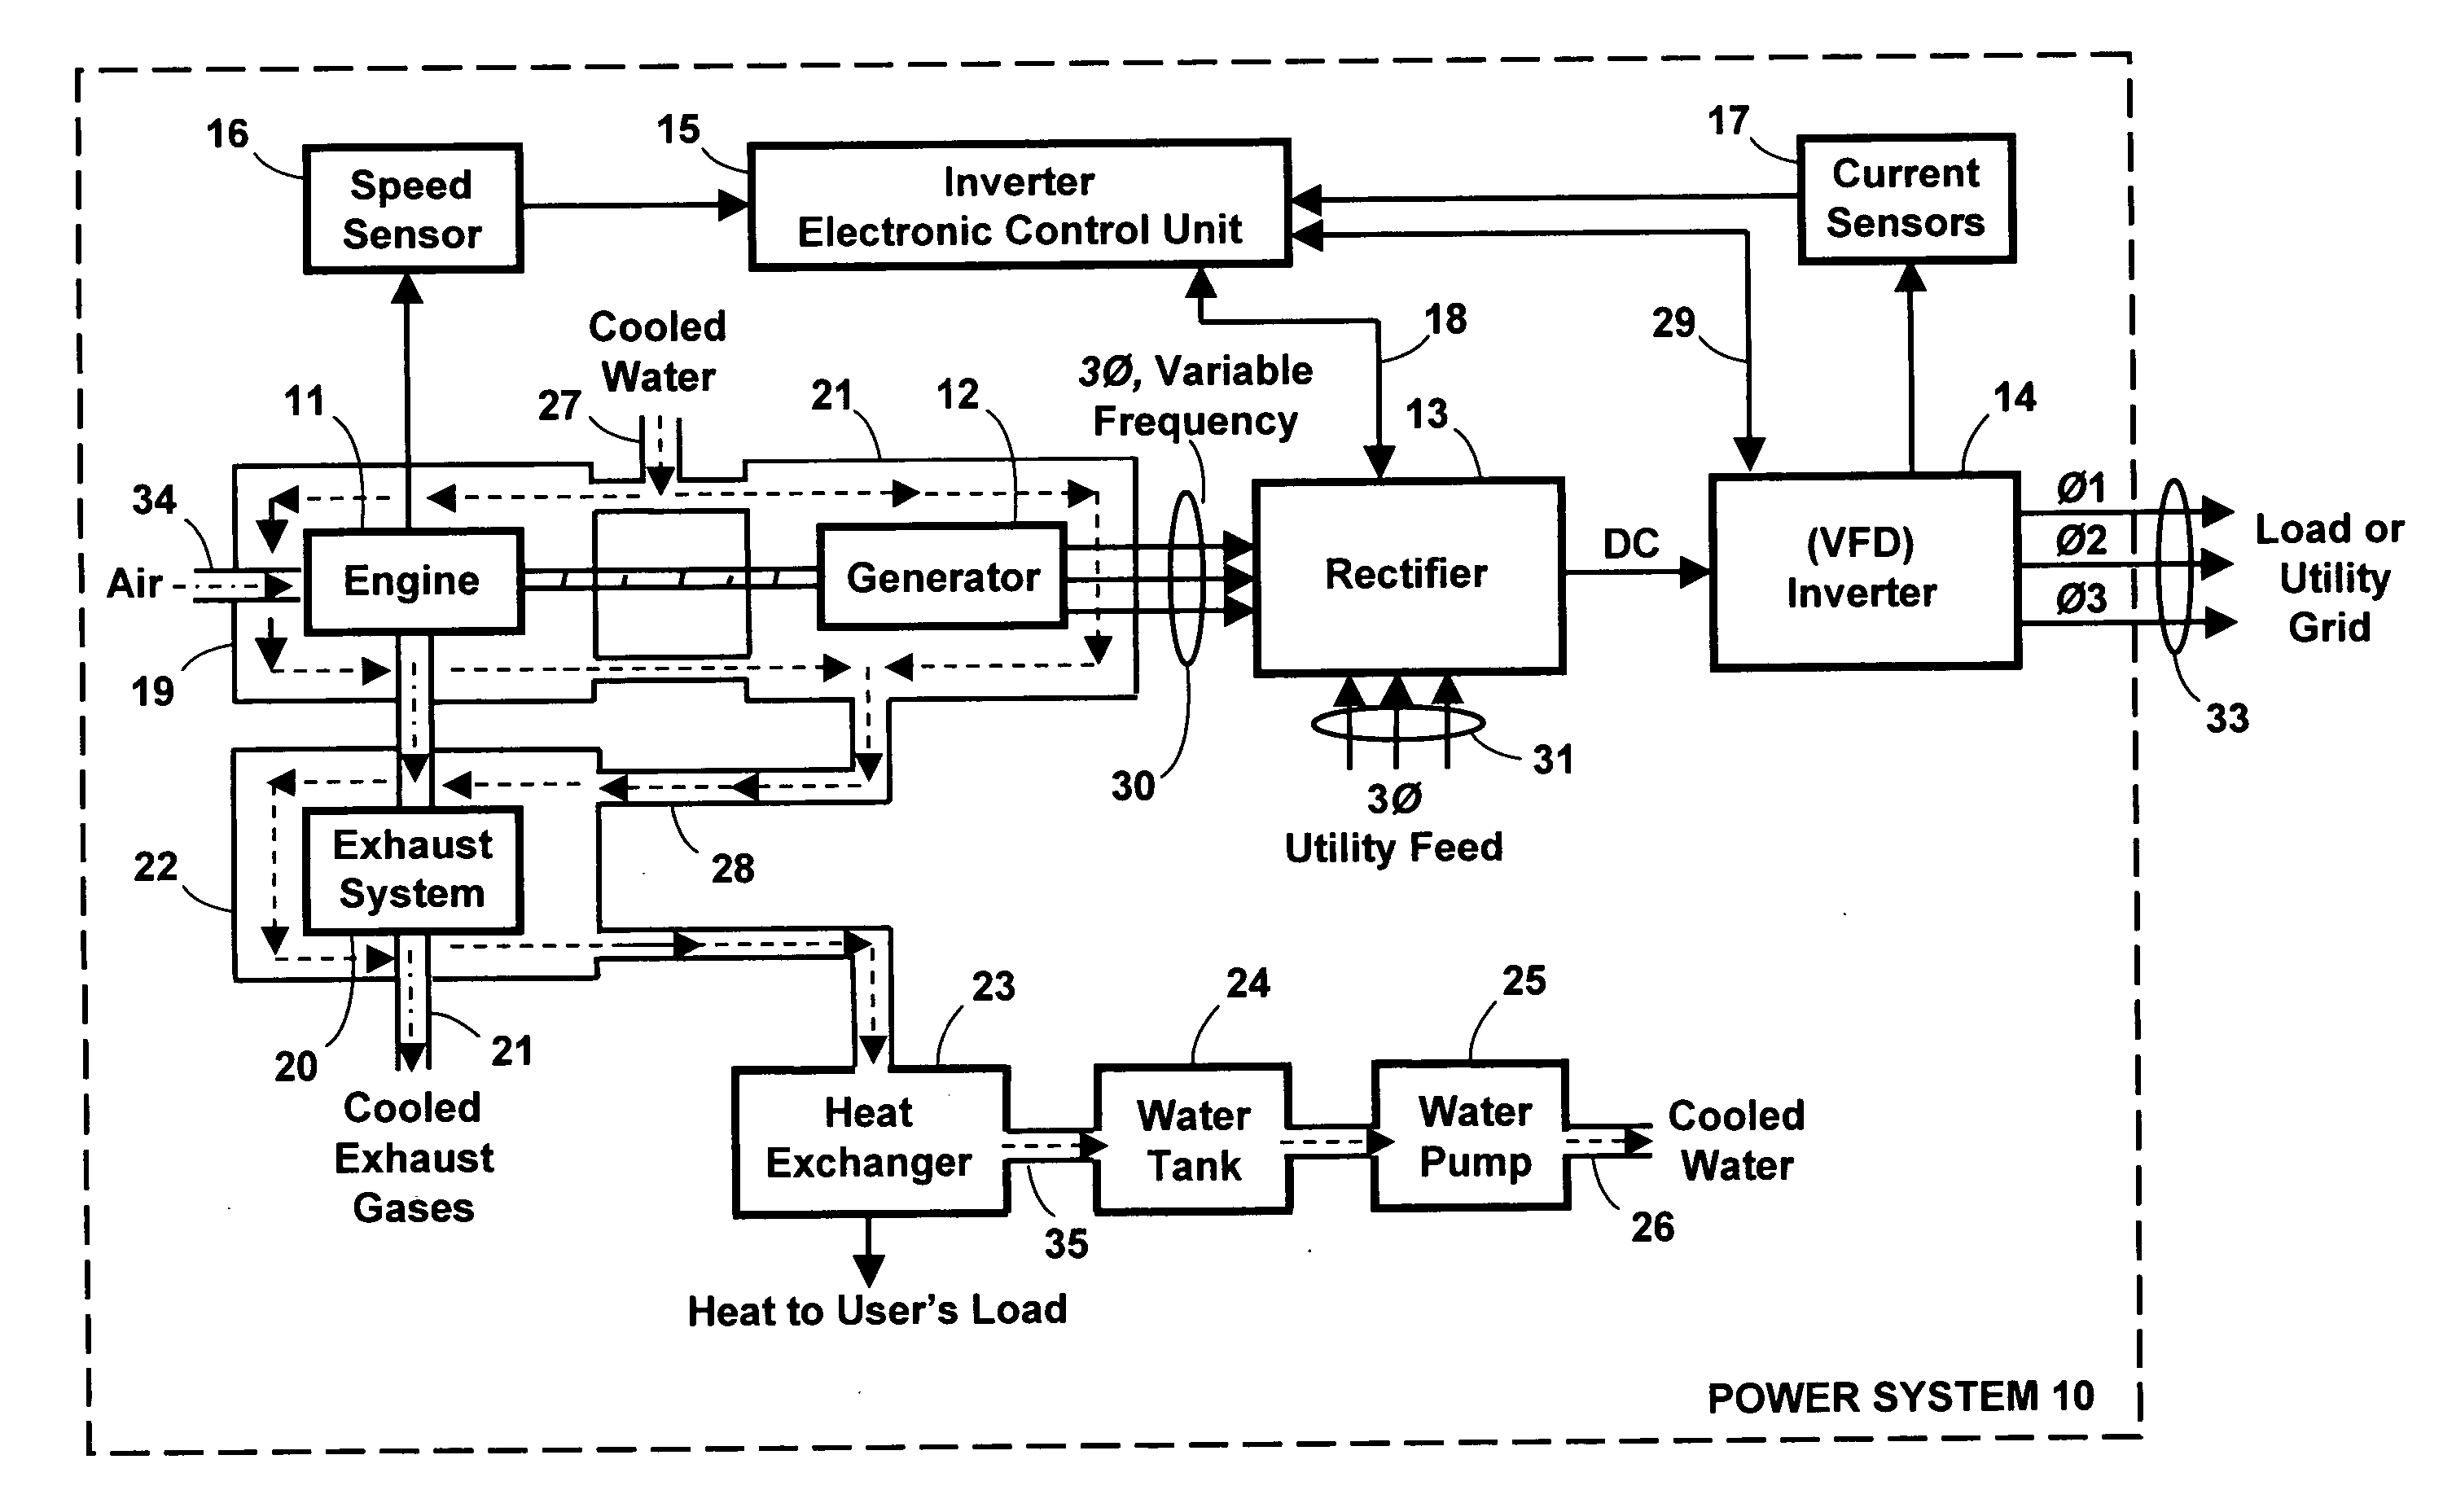 Engine driven power inverter system with cogeneration